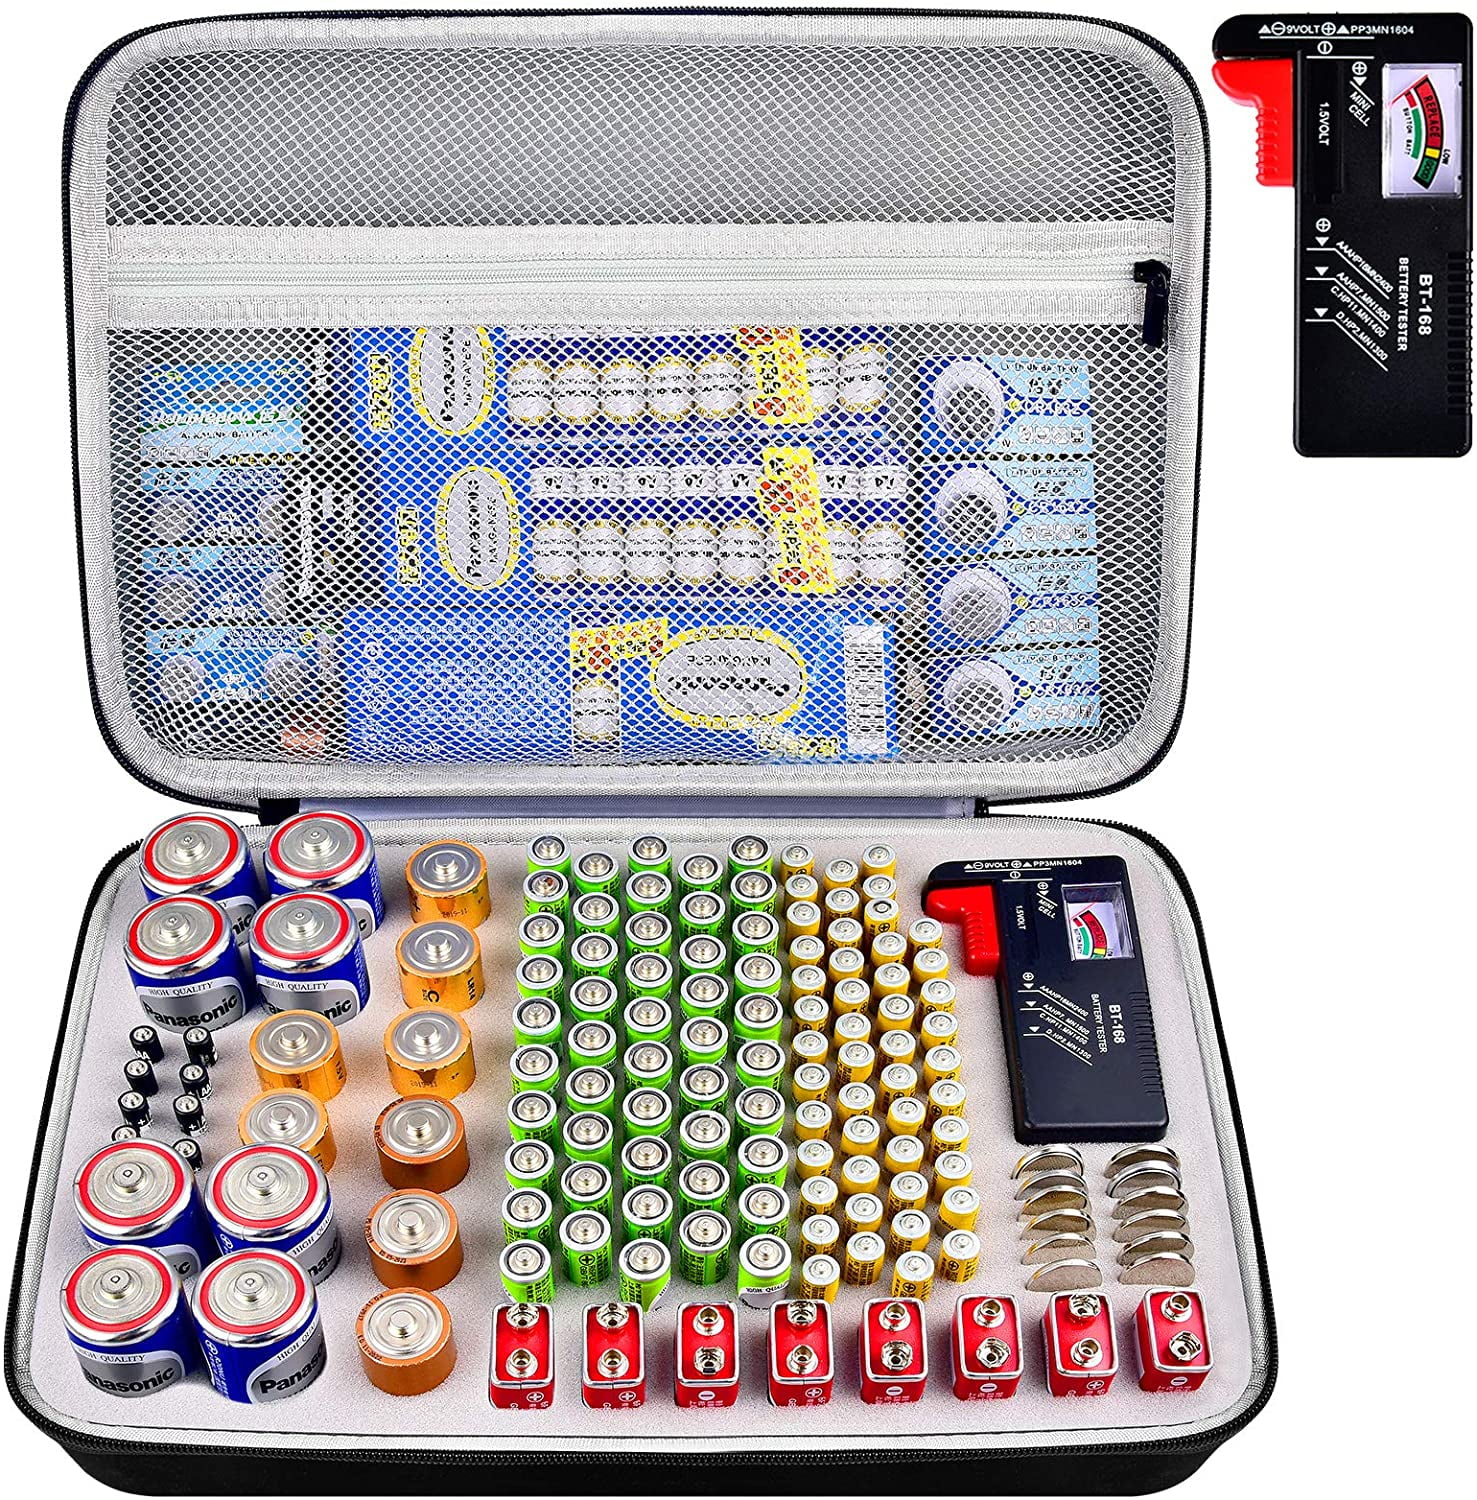 Battery Organizer Storage Case with Tester, Batteries Box Holder Garage Container Bag Fits for AA AAA AAAA 9V C D Lithium 3V (Not Includes Batteries) -